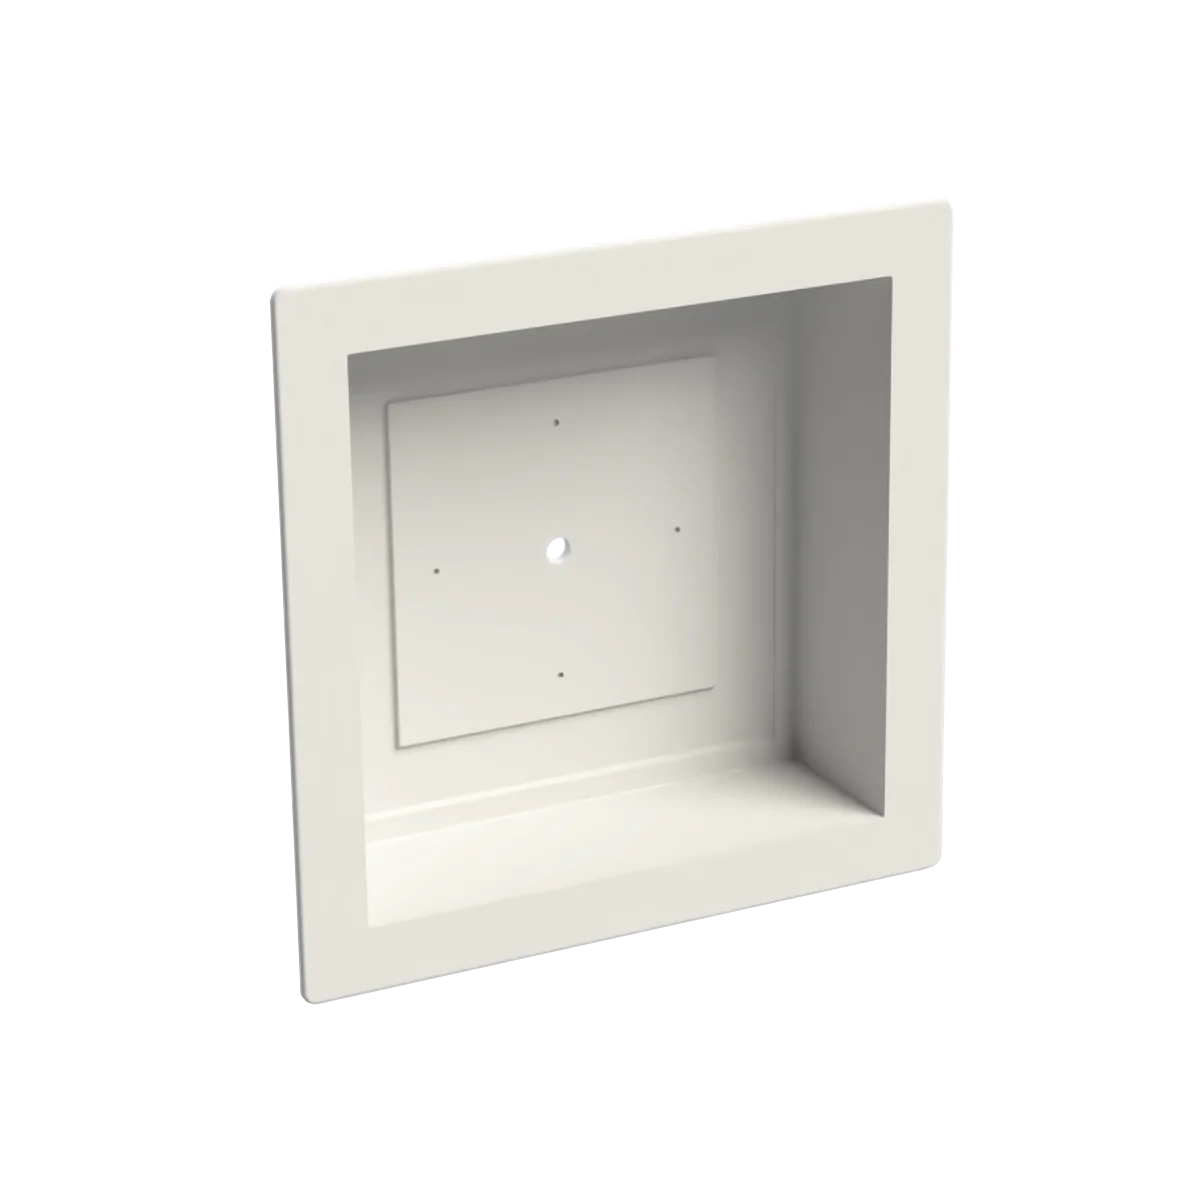 Fittes Framed Drywall Device Mount [Lite]